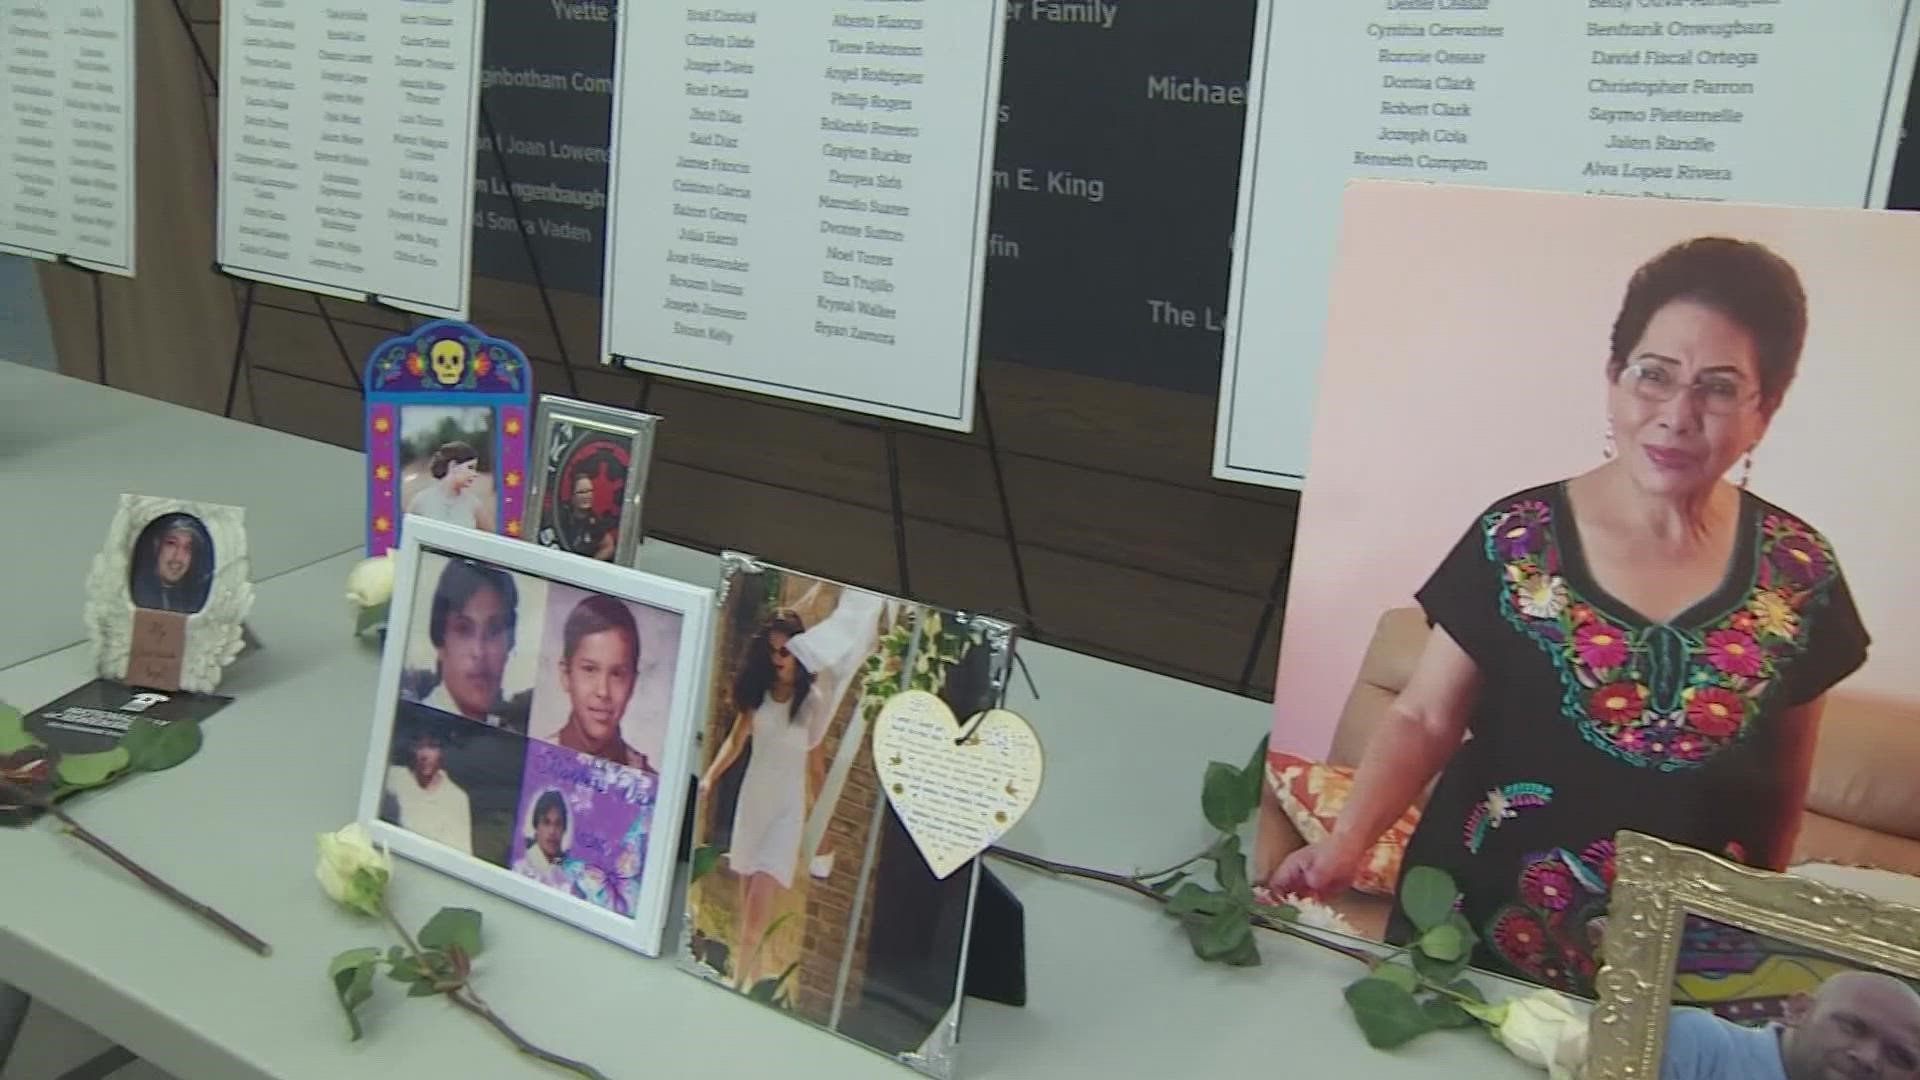 Loved ones came together to remember victims of murder and focus on the impact on families.